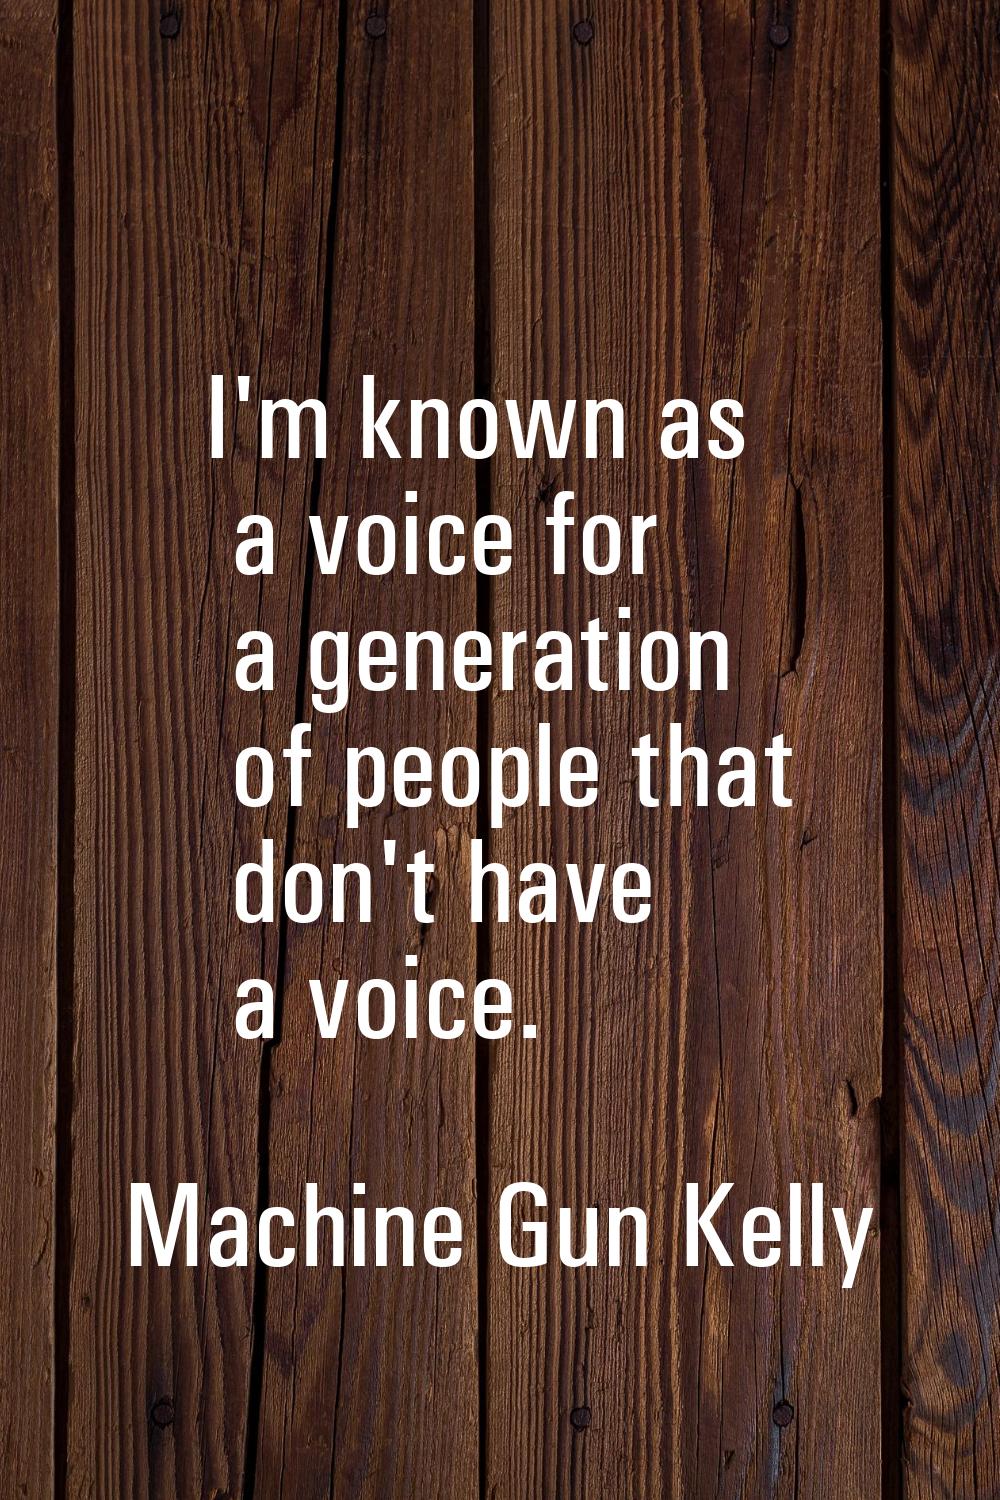 I'm known as a voice for a generation of people that don't have a voice.